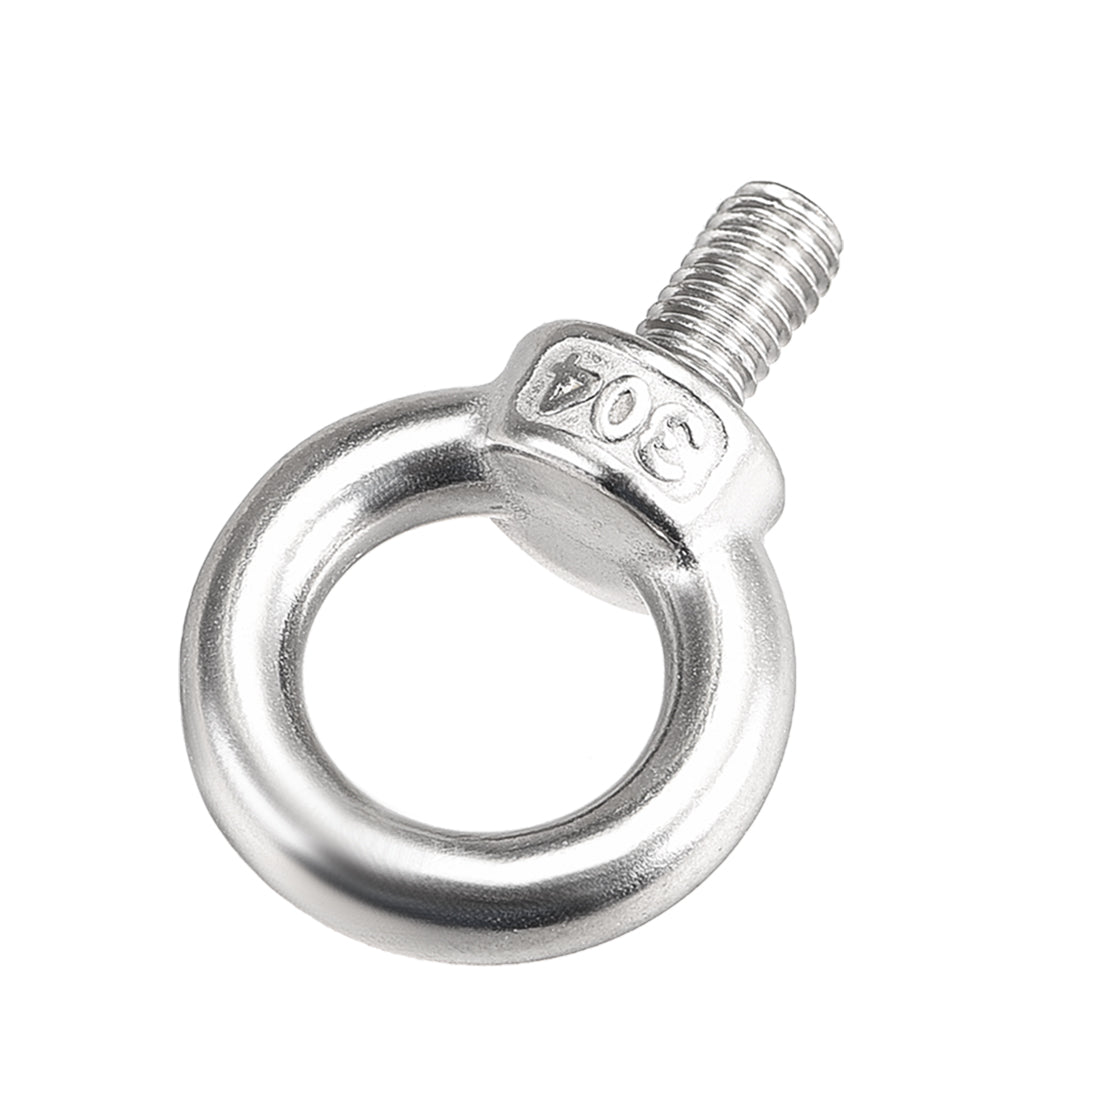 uxcell Uxcell M8 x 14mm 304 Stainless Steel Metric Thread Machinery Shoulder Lifting Eye Bolt 2Pcs